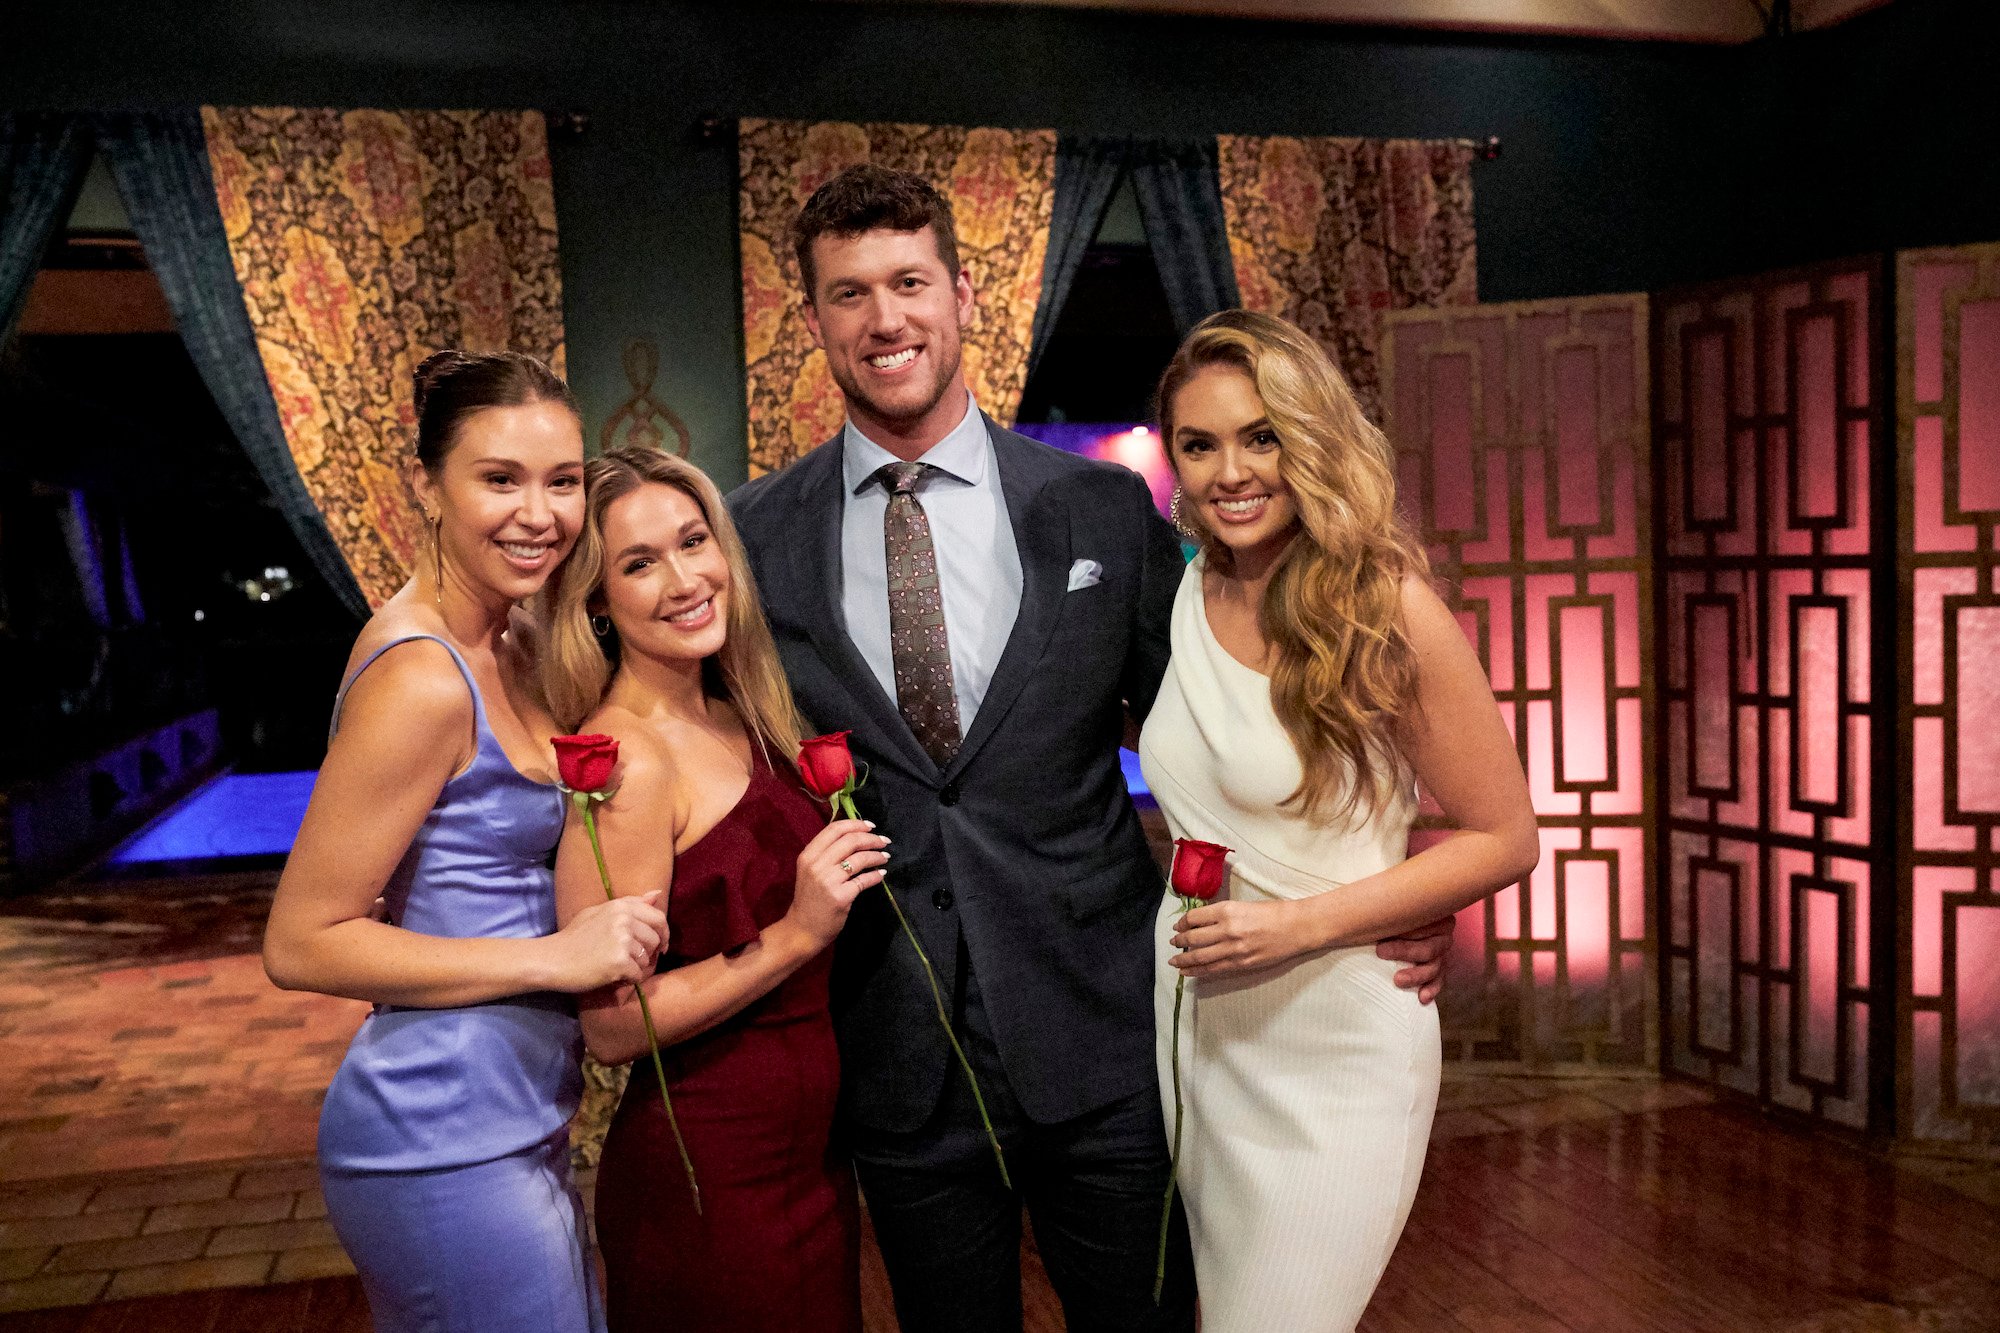 'The Bachelor' star Clayton stand with Gabby, Rachel, and Susie in a BTS photo from this season.